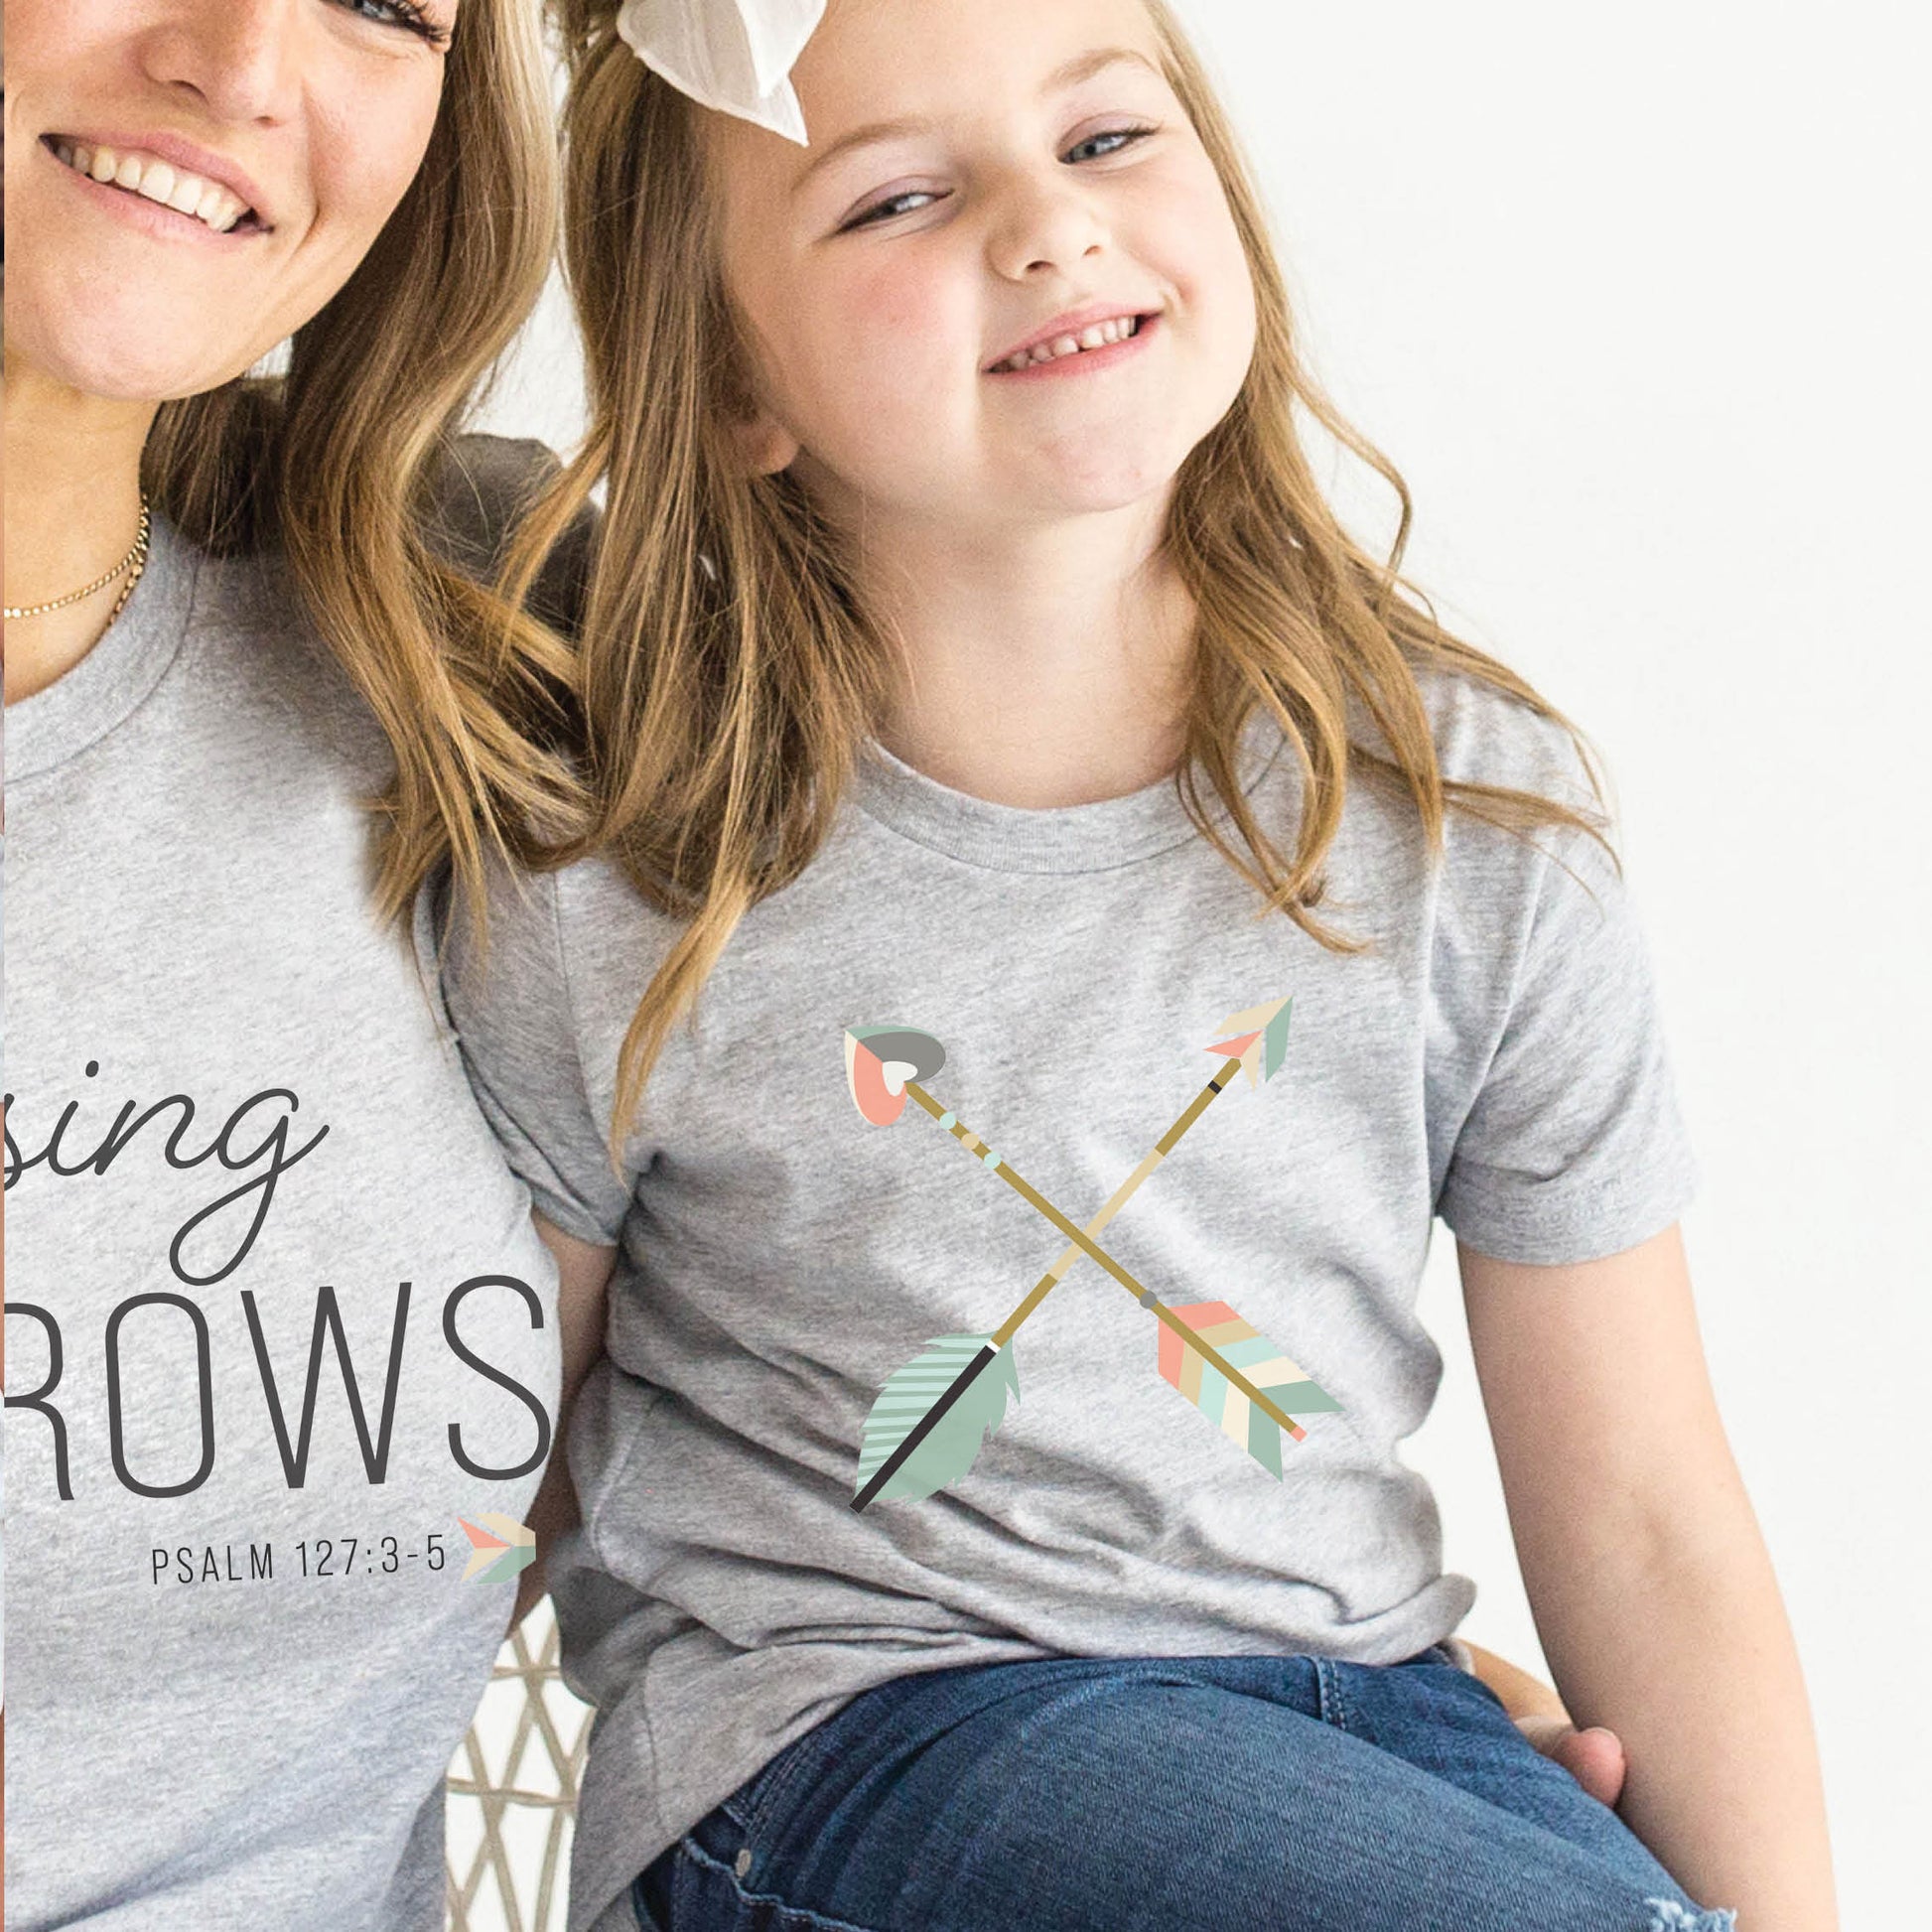 Young girl wearing a matching mommy-and-me Youth size t-shirt in heather gray with teal blue and dusty pink pastel criss-cross boho arrows, one with a heart on the end, to match Christian homeschool mom's / women's "Raising Arrows" Psalm 127:4-5 bible verse t-shirt for boys and girls